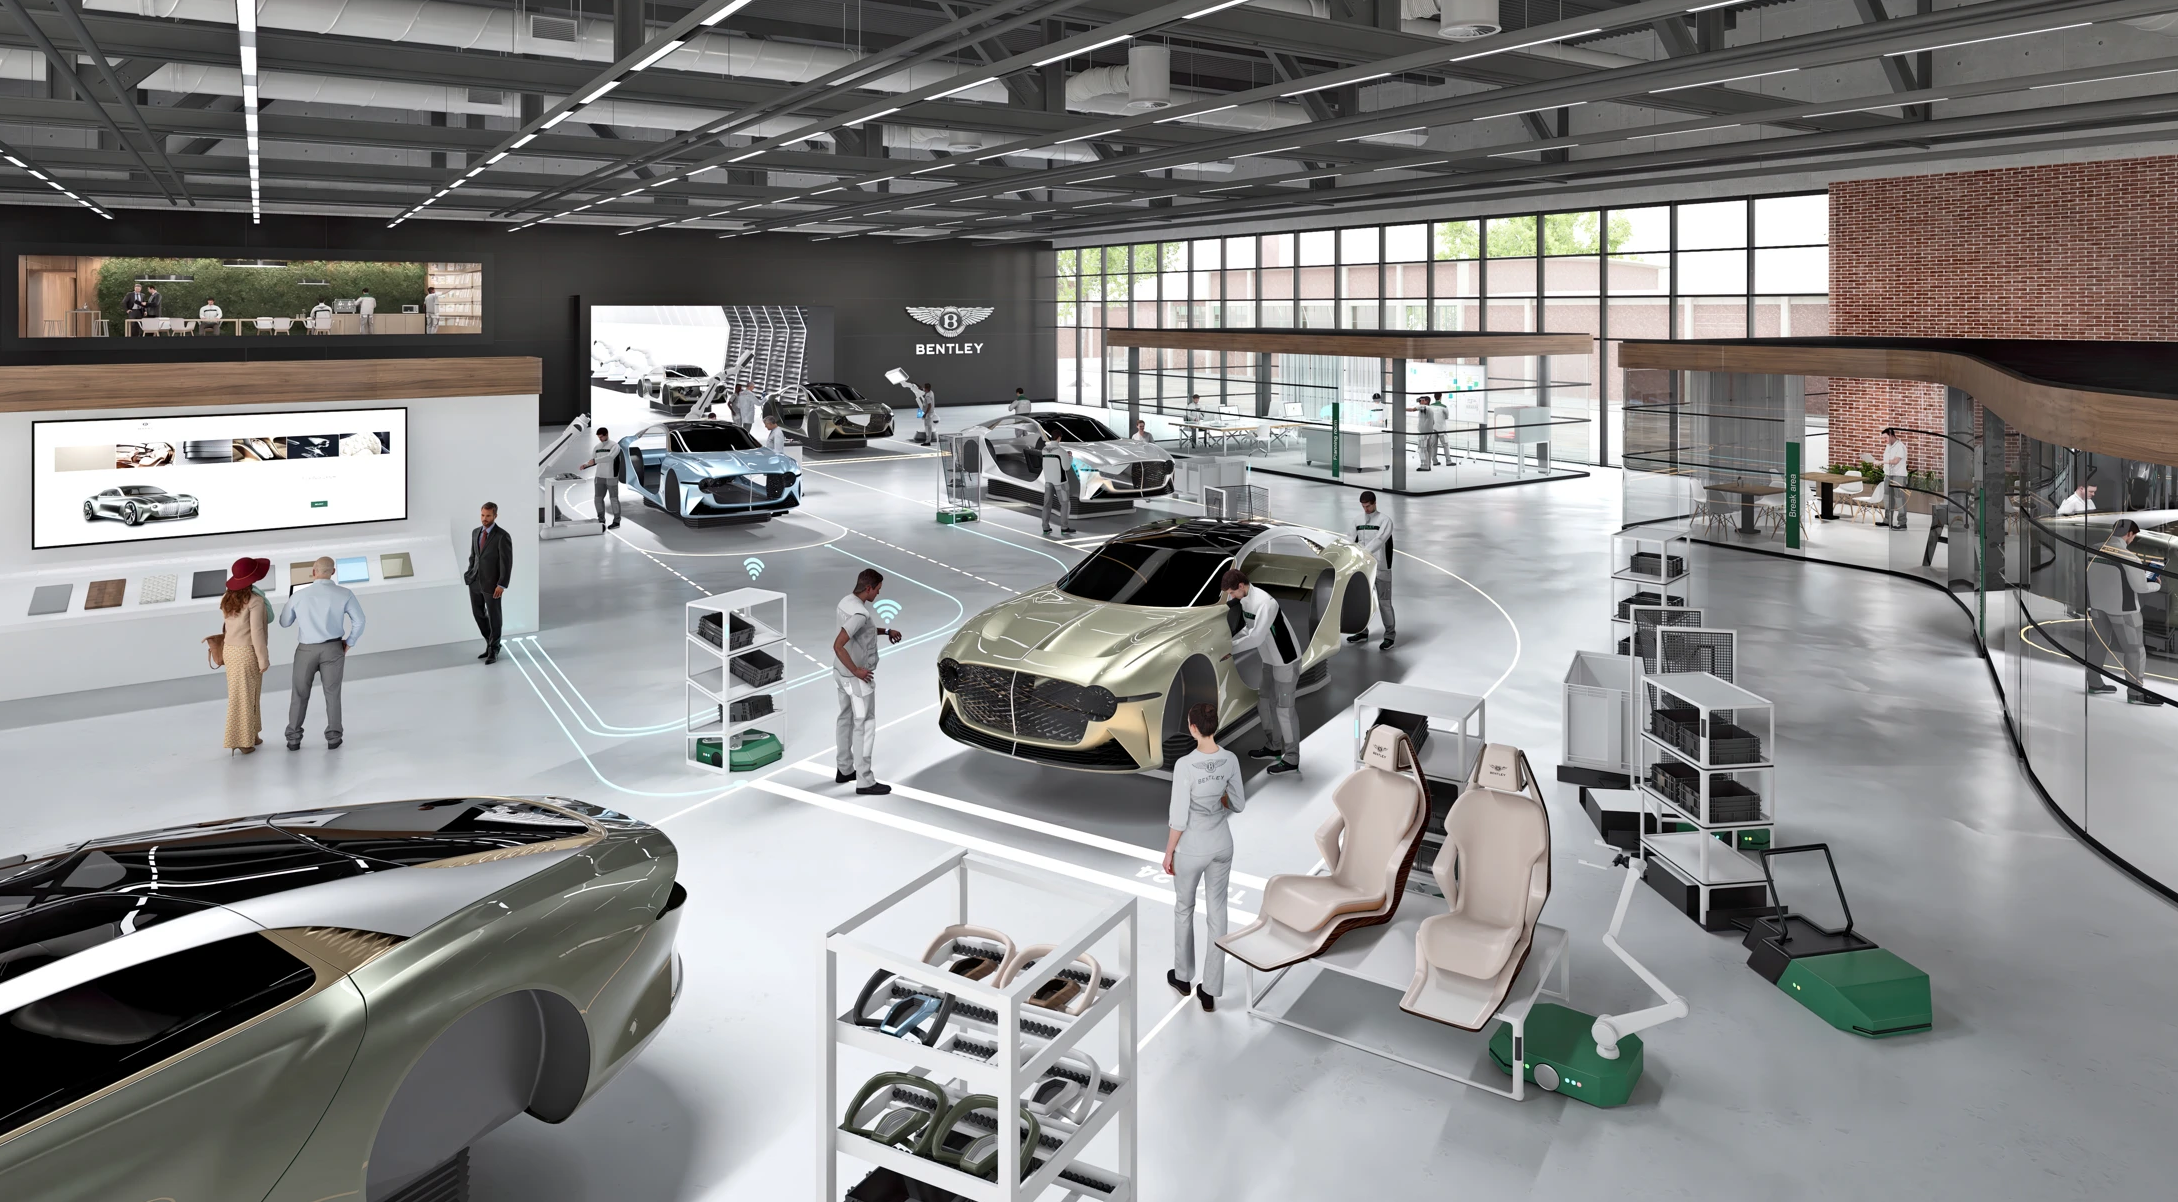 ‘Dream Factory’ will make Bentley’s BEVs of the future